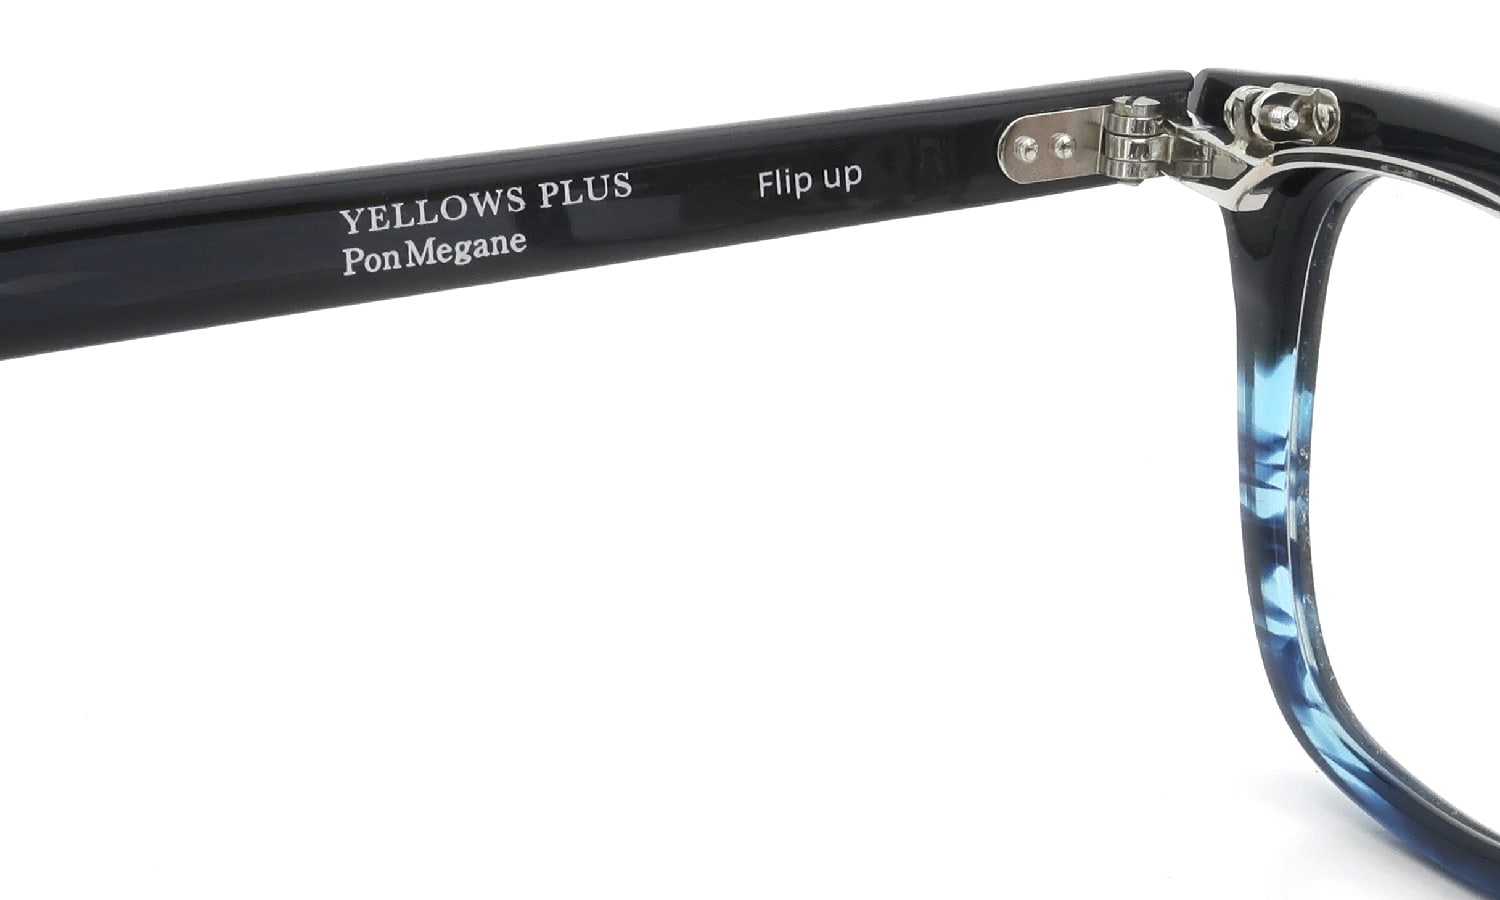 YELLOWS PLUS for PonMegane 跳ね上げ式メガネ Flip up Celluloid Blue two tone